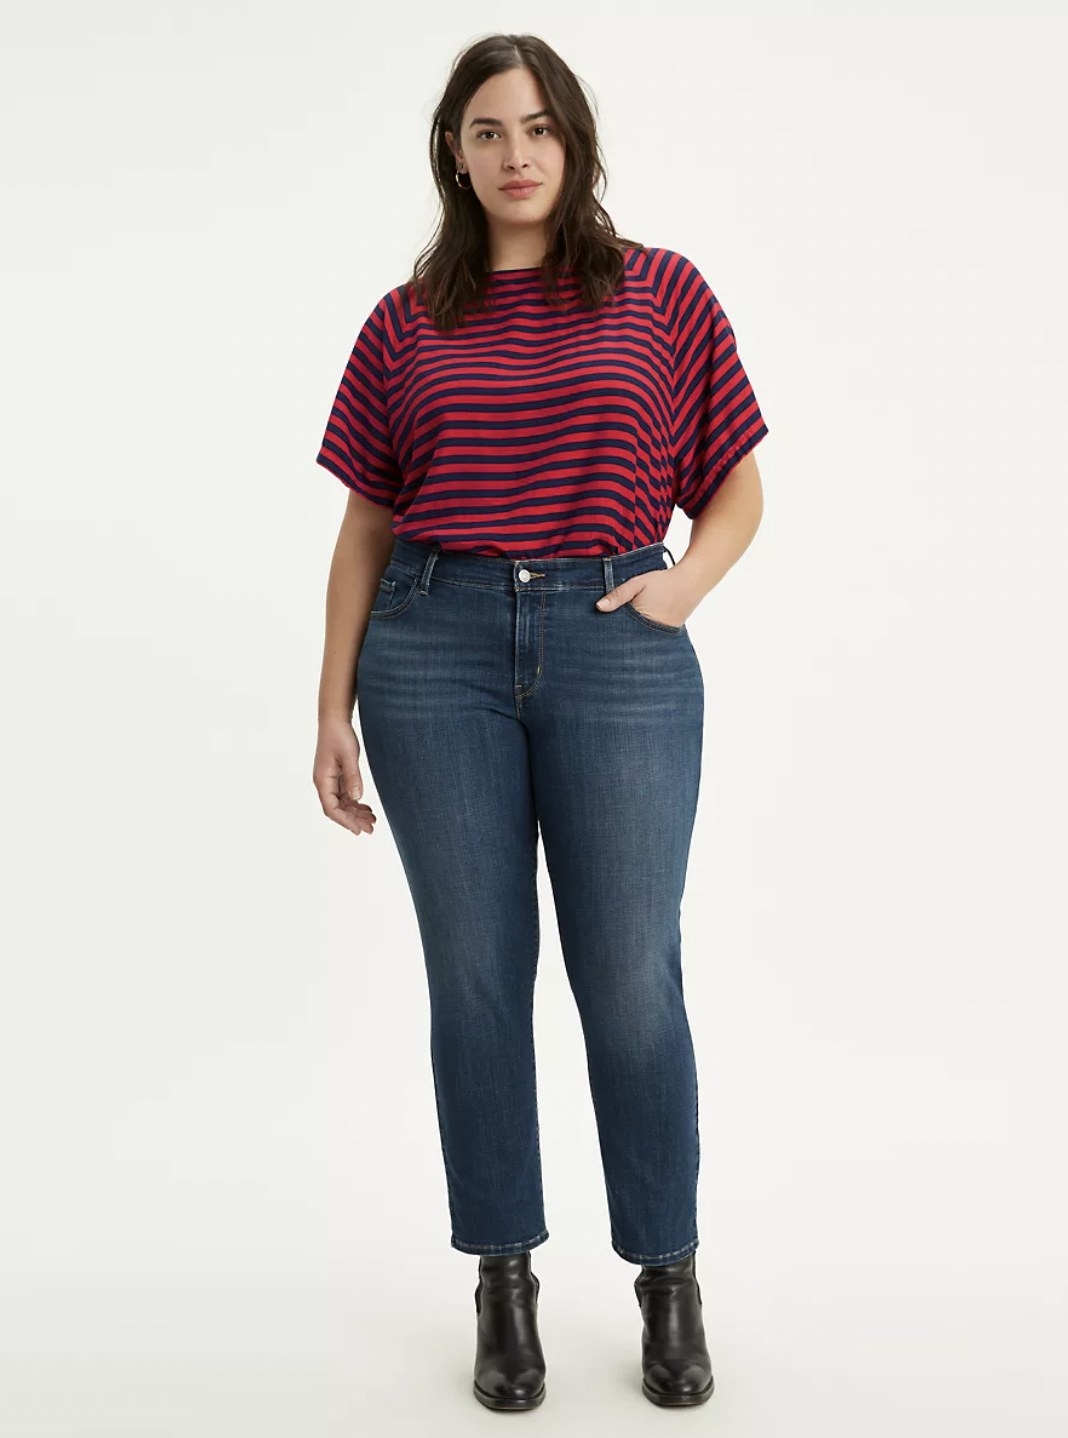 Model wearing the dark blue wash jeans with ankle boots and striped tee